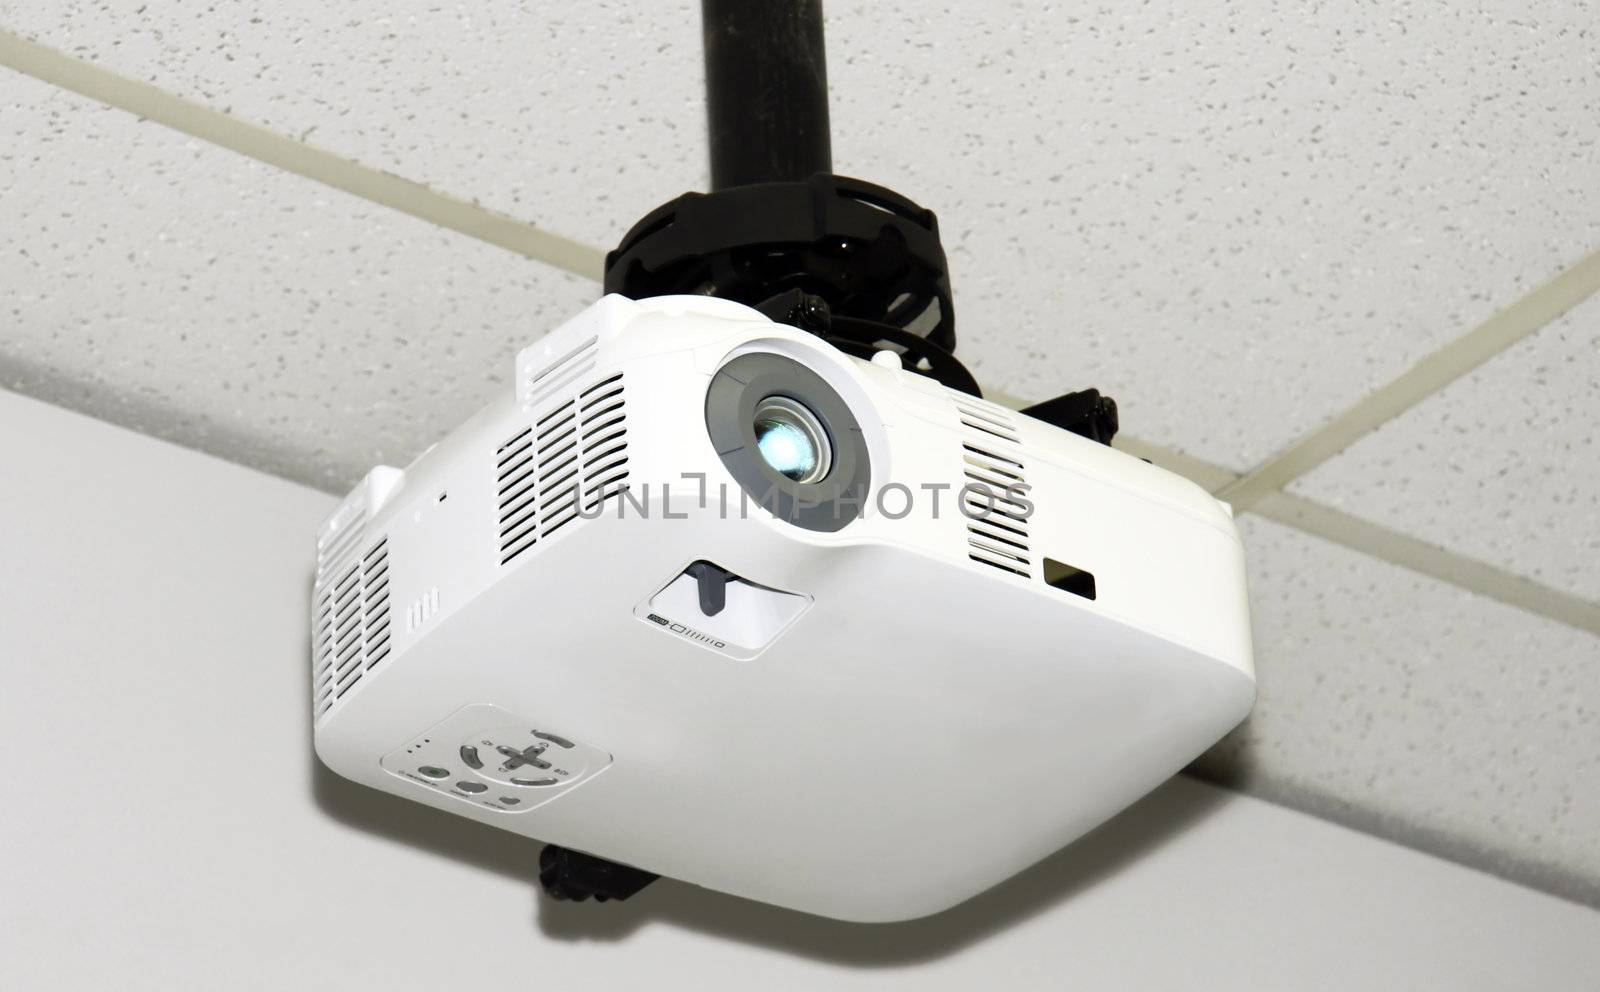 Close-up of a multi-media projector attached to the acoustic ceiling tiles of a small office.